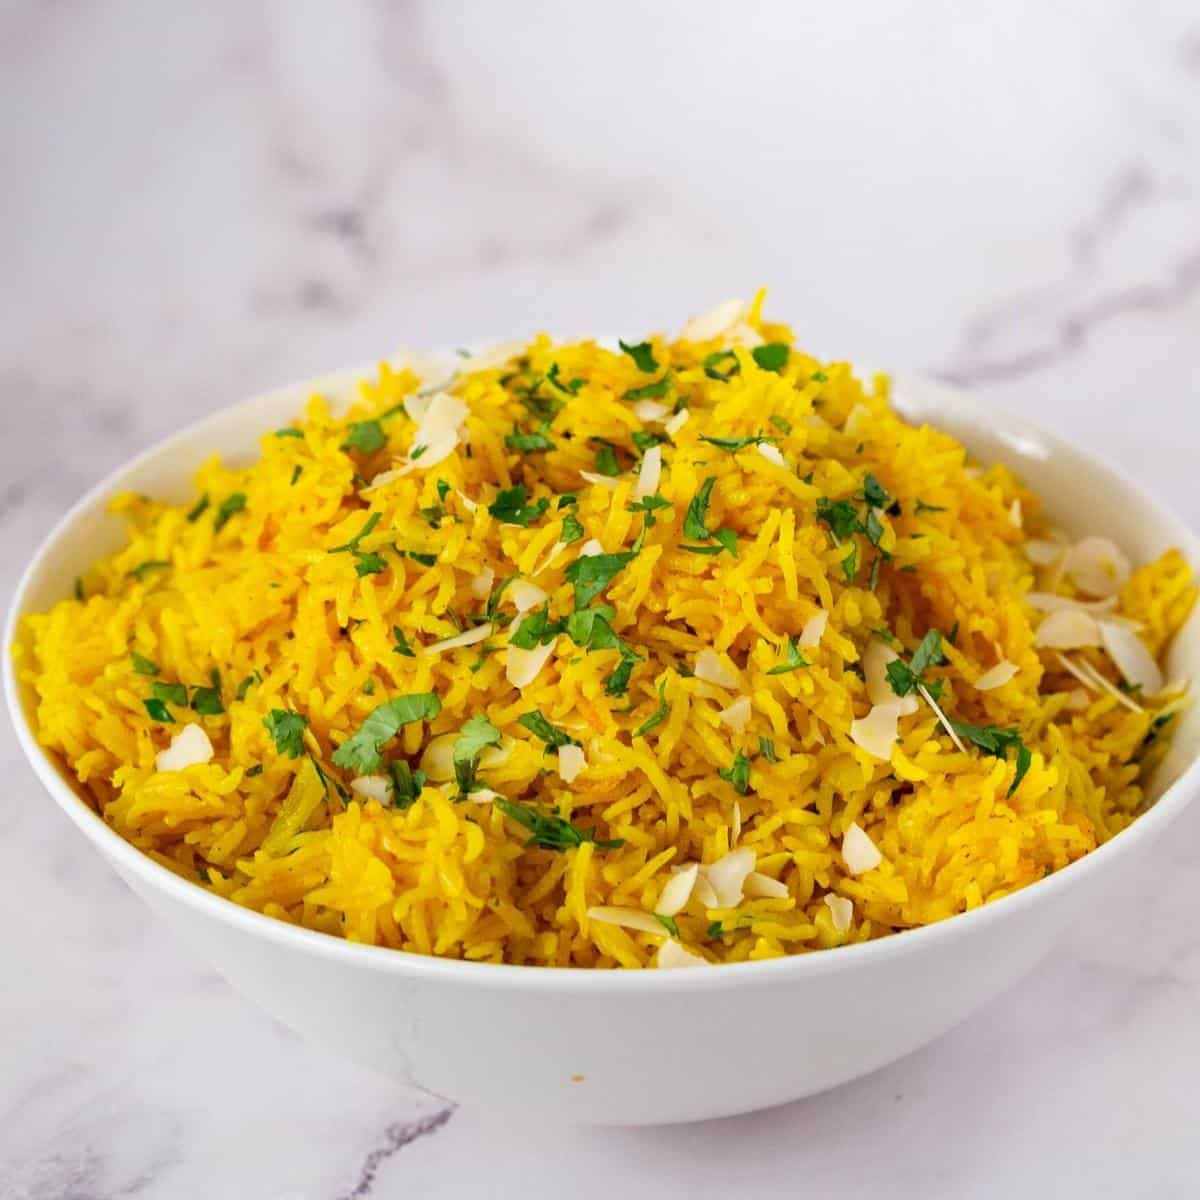 A bowl with yellow rice made with turmeric and coconut milk.